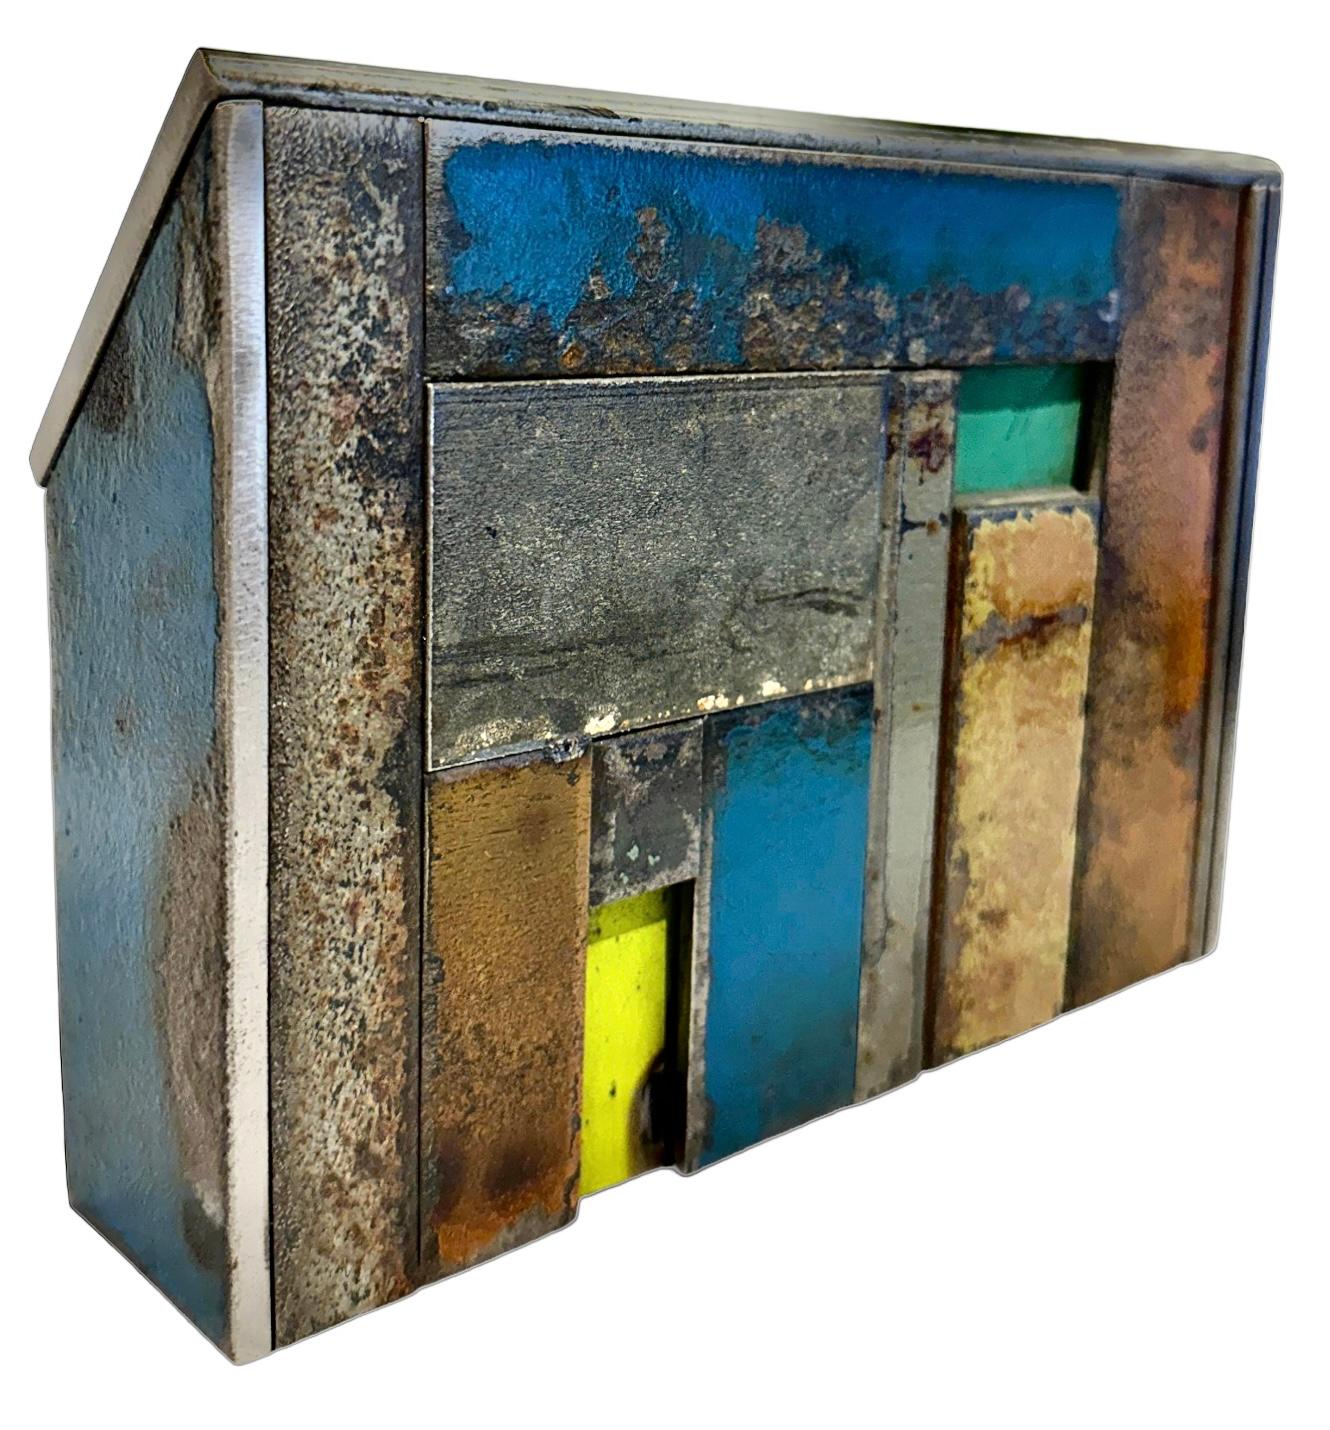 Jim Rose, known primarily for his steel furniture, was an avid collector and scoured salvage yards for unique and interesting items. Here, a collection of found steel is reworked, preserving the original painted surface which has been aged and